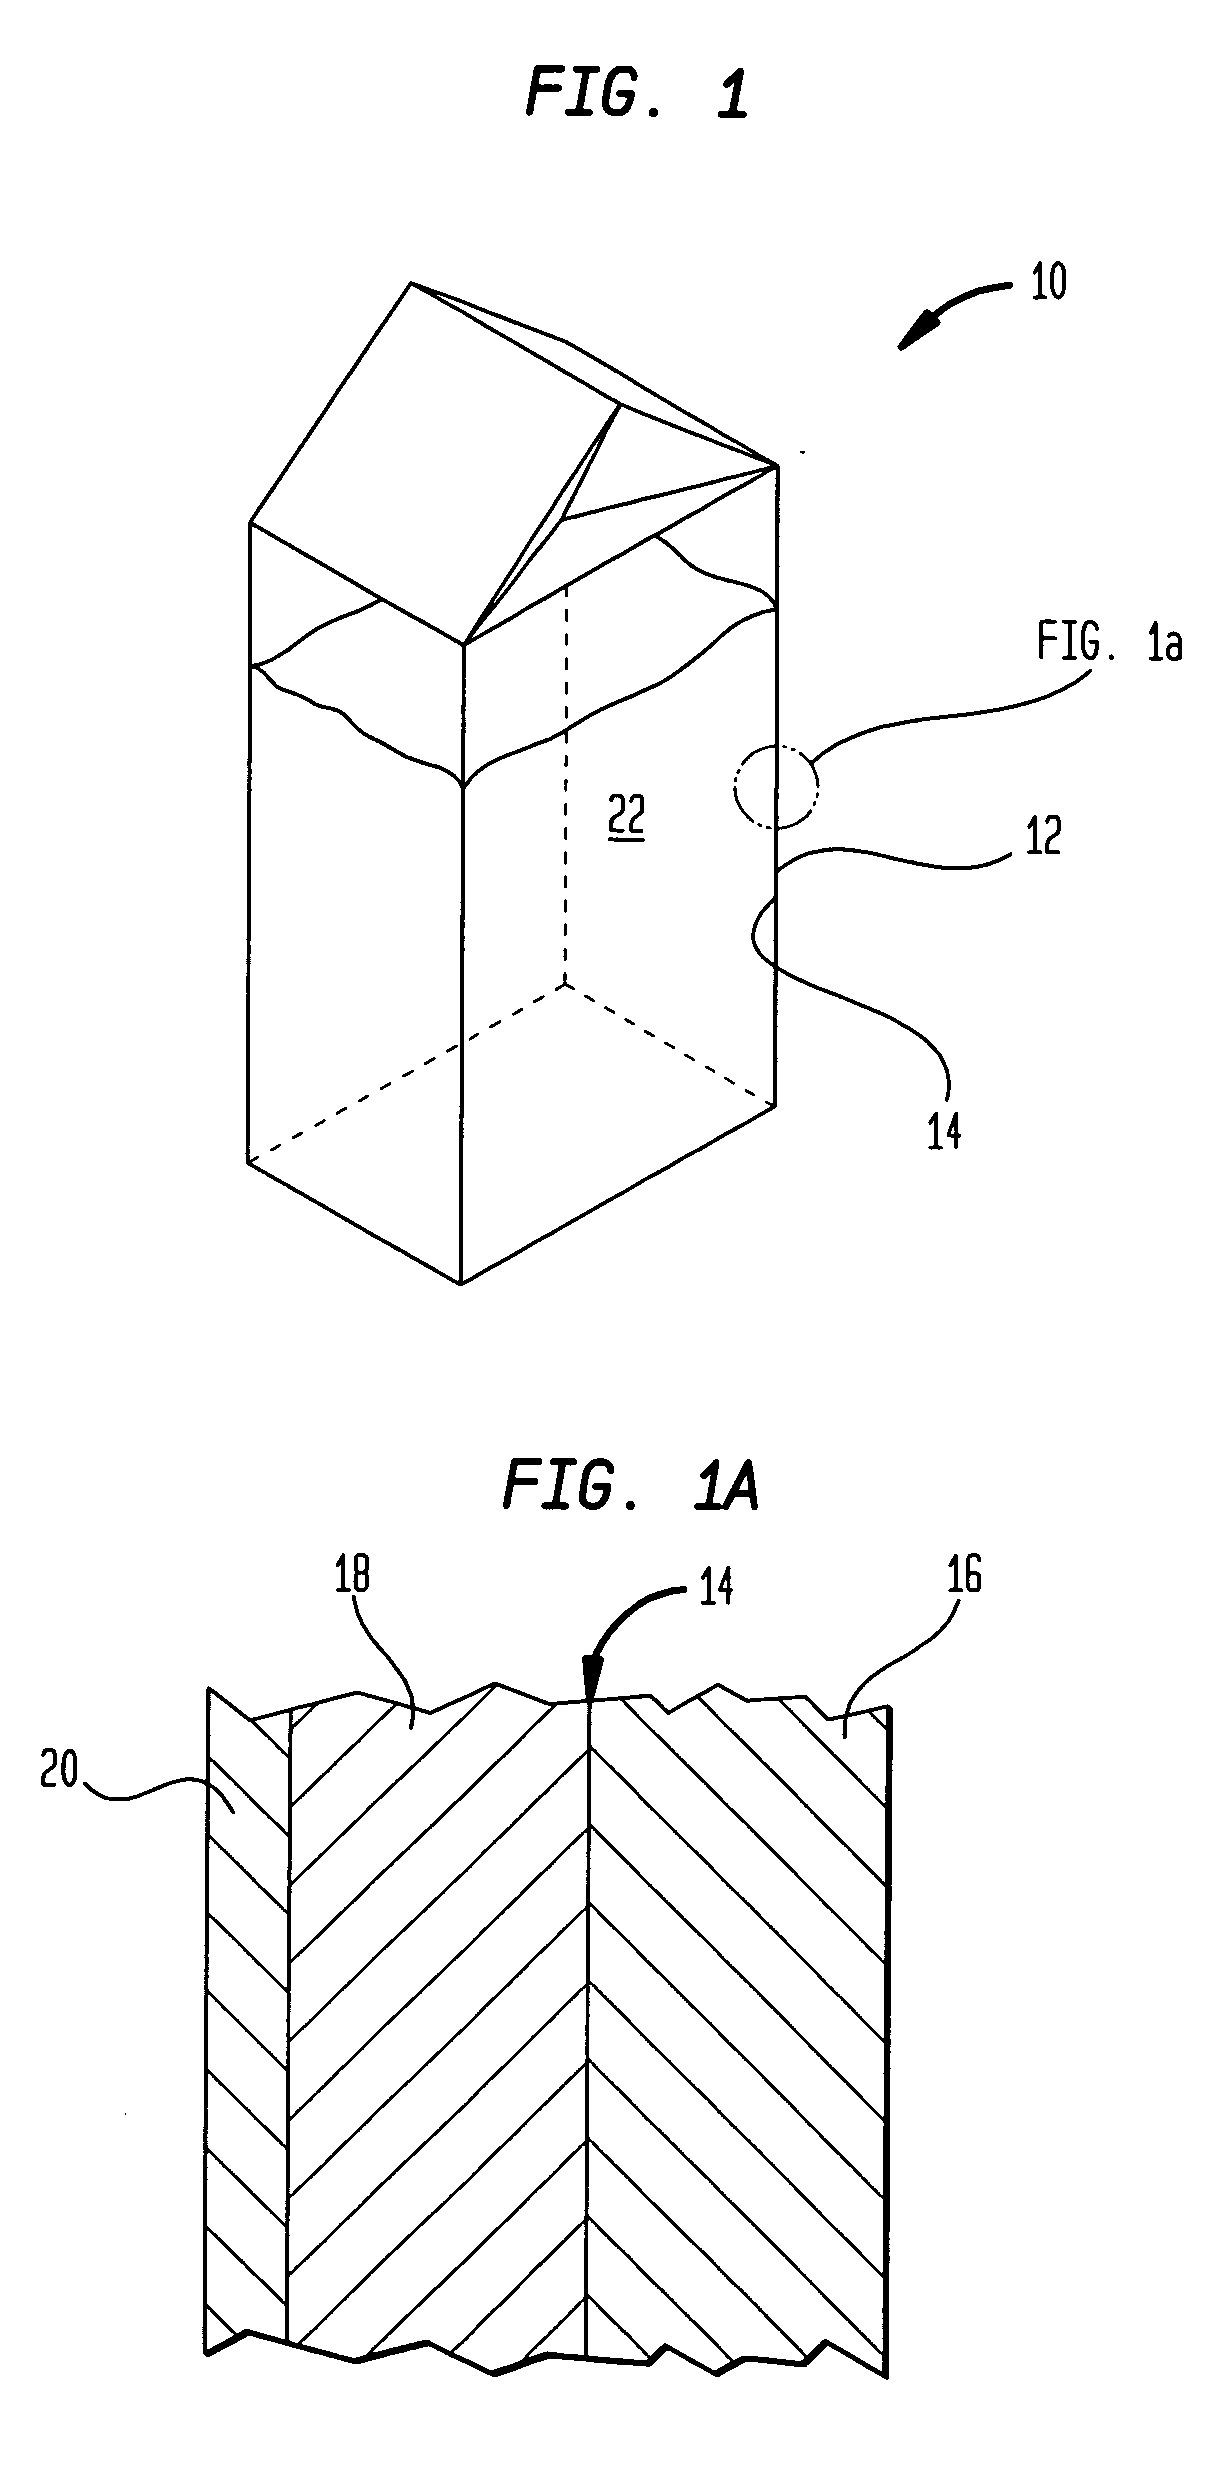 Packaging with cycloolefin food/beverage contact layer